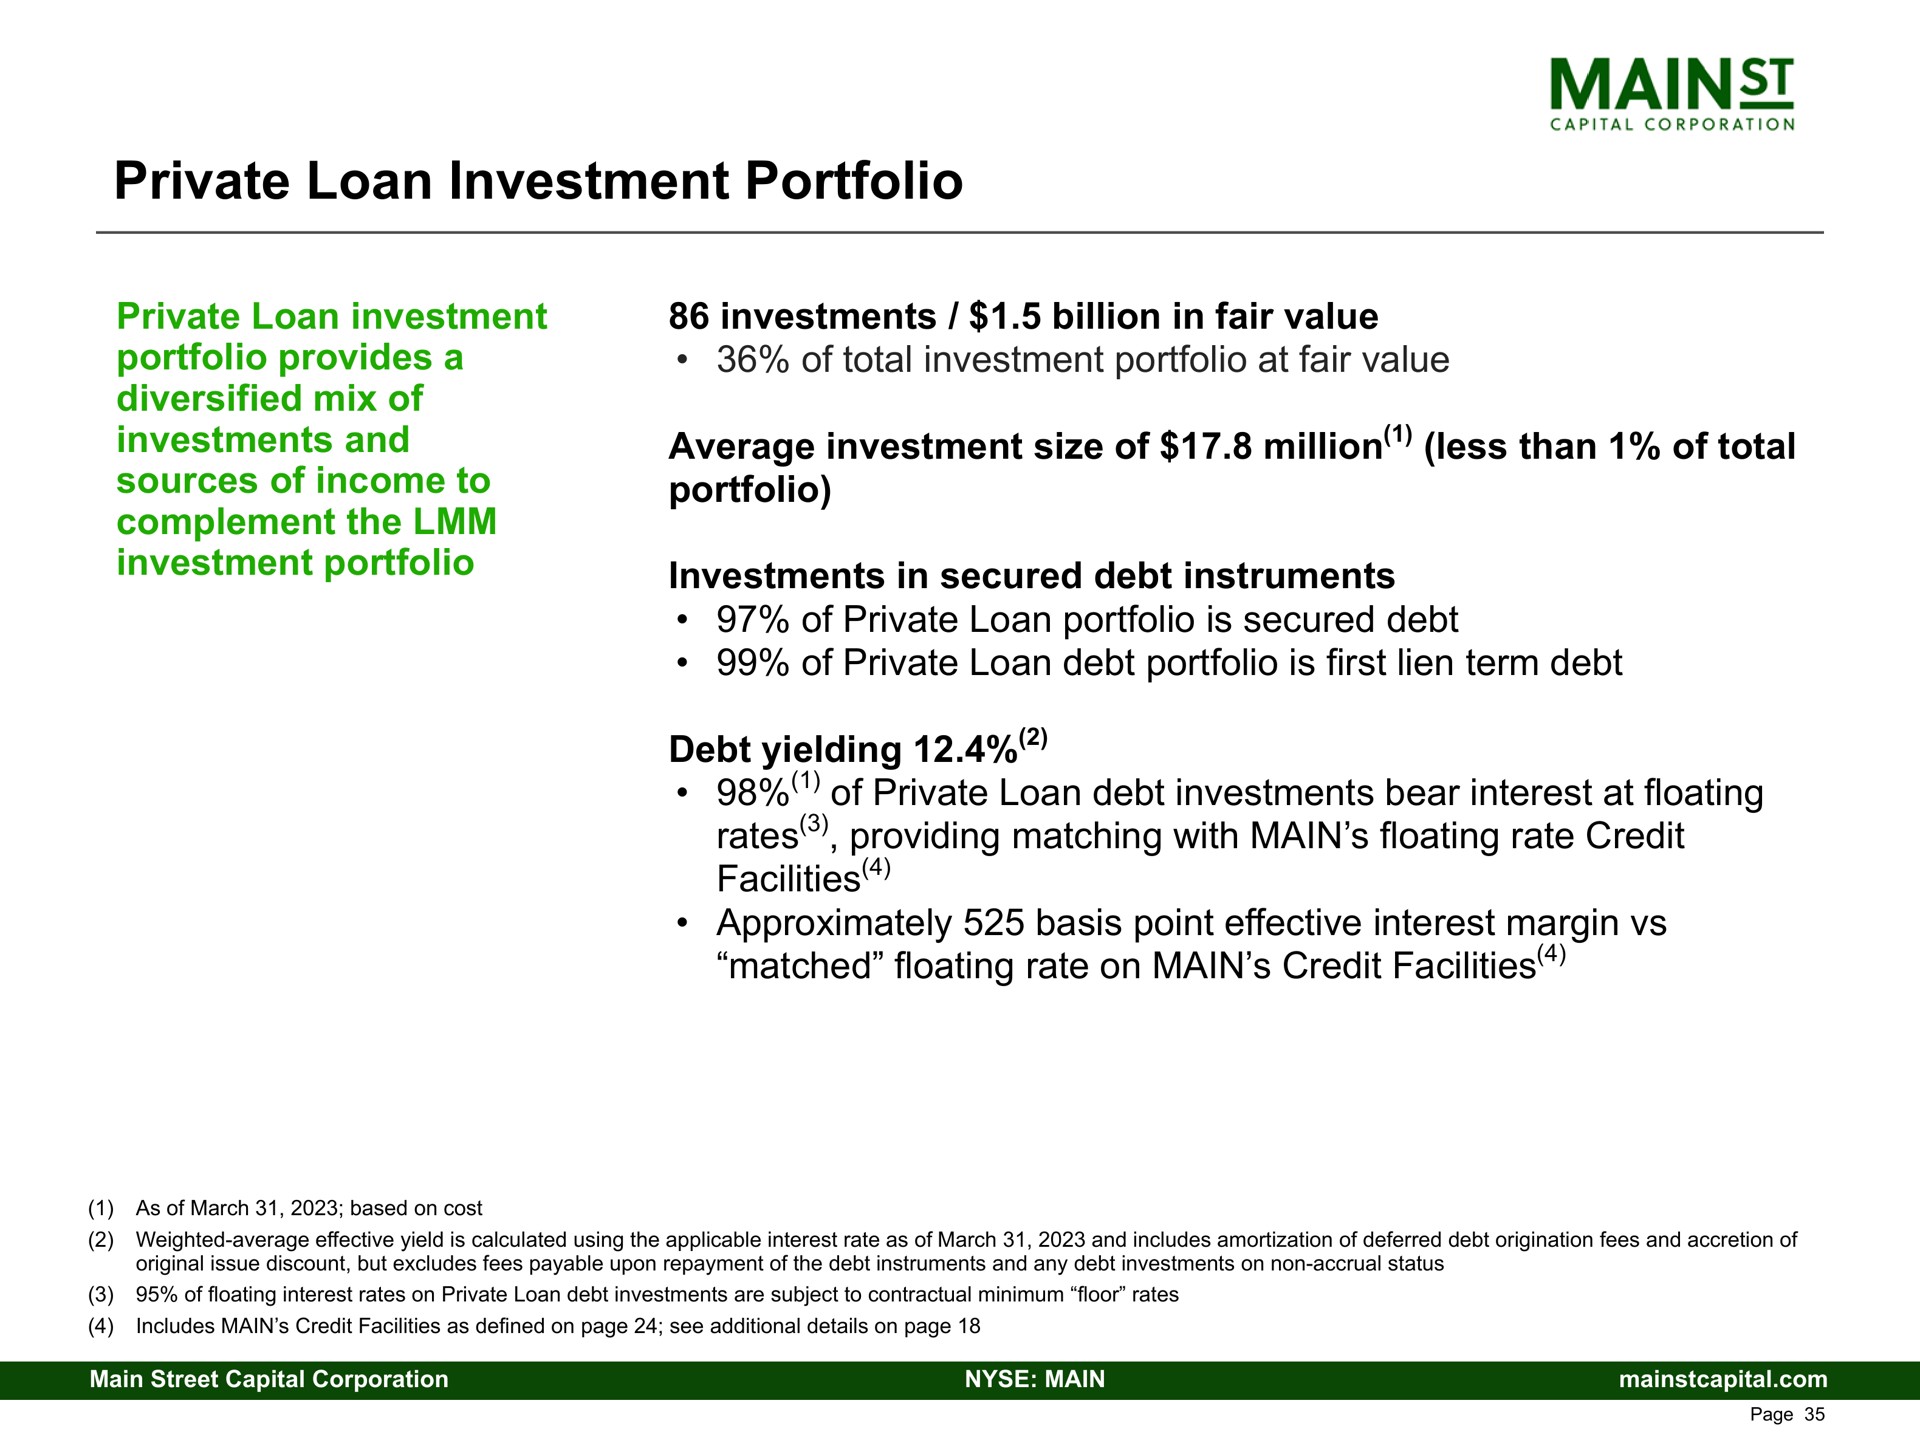 private loan investment portfolio private loan investment portfolio provides a diversified mix of investments and sources of income to complement the investment portfolio investments billion in fair value of total investment portfolio at fair value average investment size of million less than of total portfolio investments in secured debt instruments of private loan portfolio is secured debt of private loan debt portfolio is first lien term debt debt yielding of private loan debt investments bear interest at floating rates providing matching with main floating rate credit facilities approximately basis point effective interest margin matched floating rate on main credit facilities | Main Street Capital